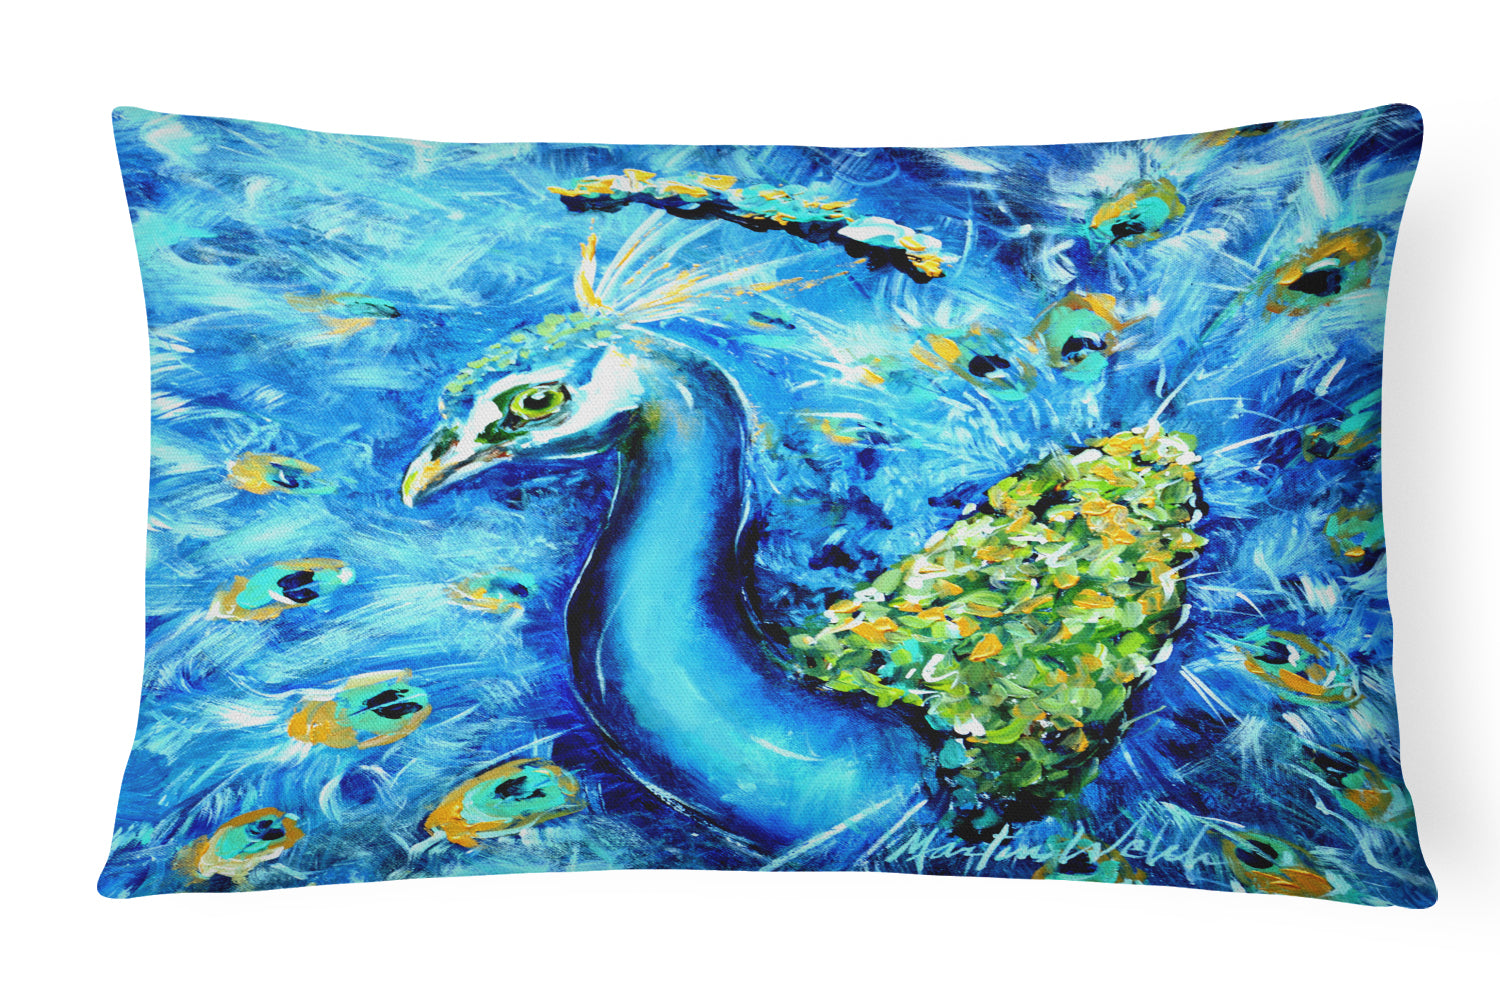 Buy this Peacock Straight Up in Blue Canvas Fabric Decorative Pillow